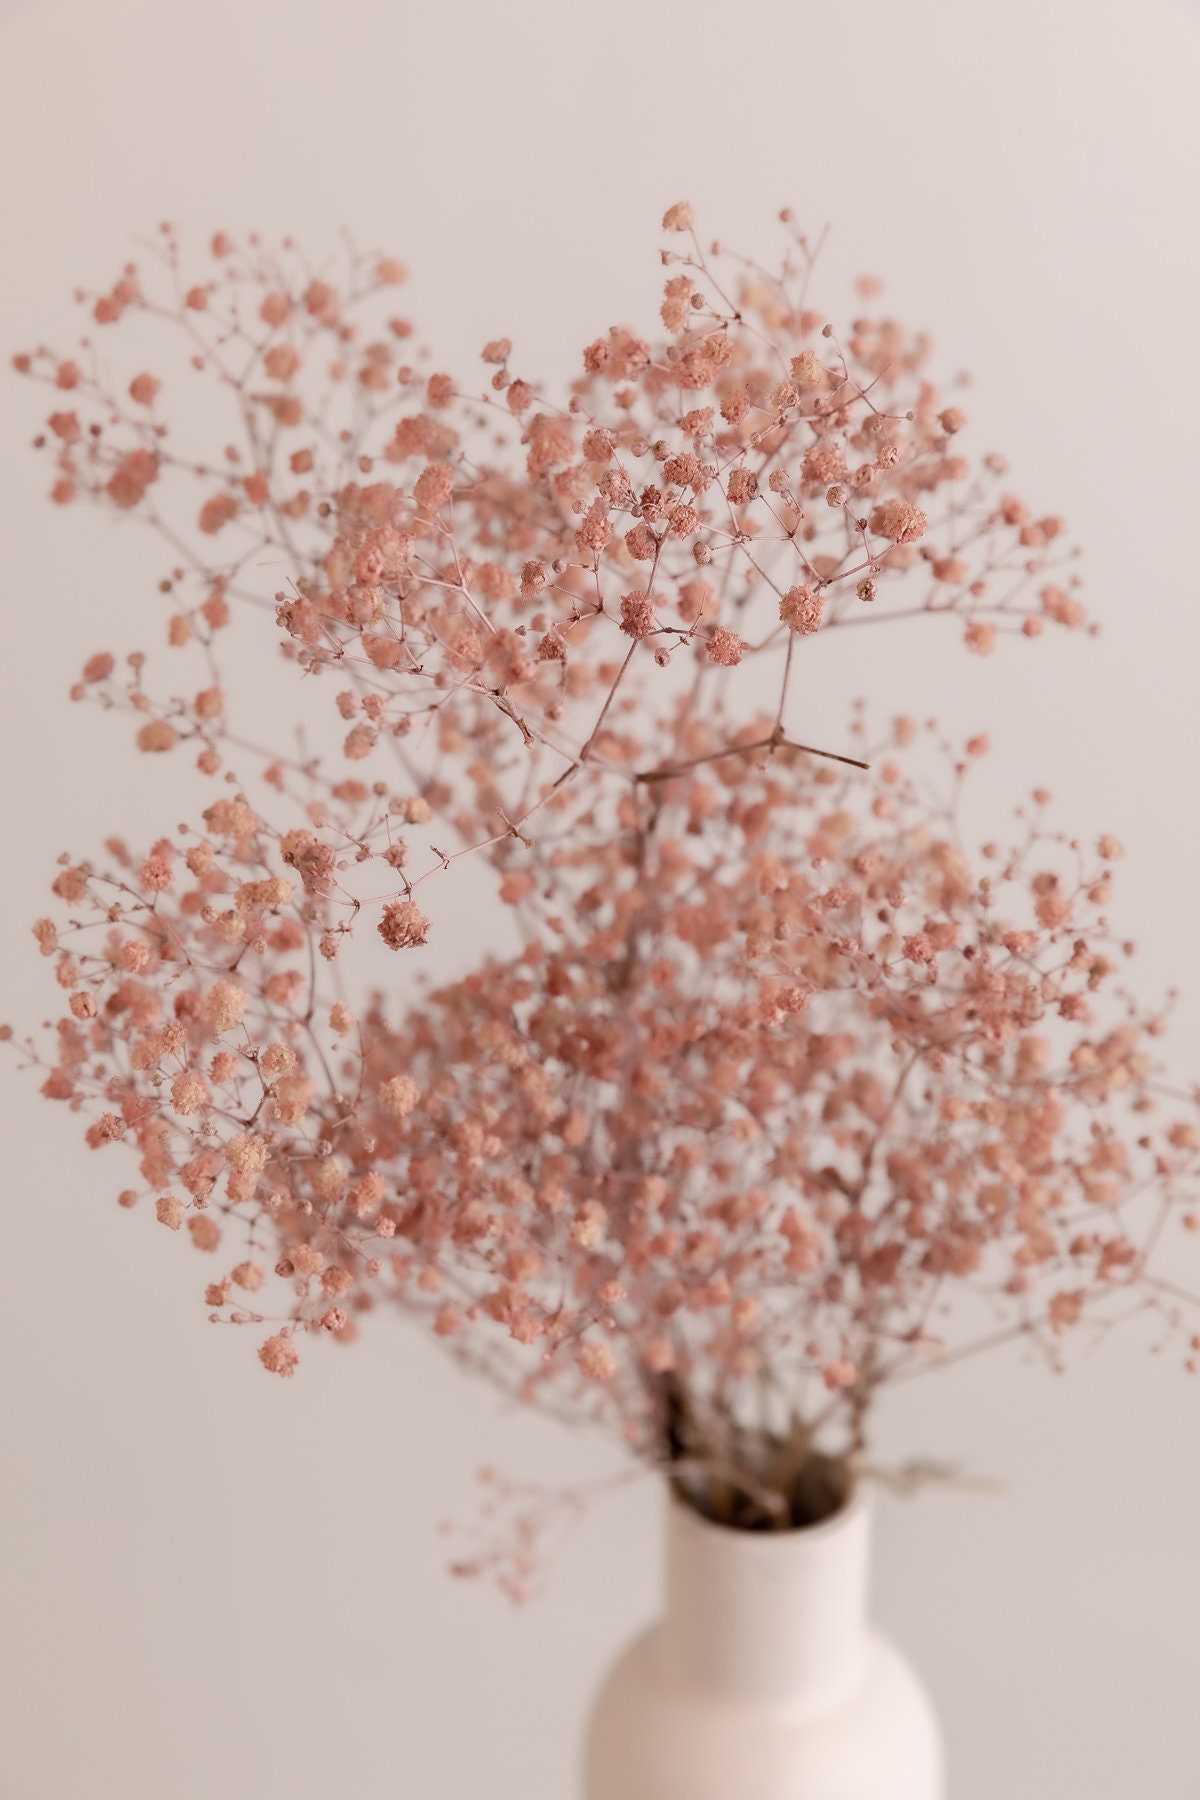 65Pcs Mini Pink Dried Baby's Breath Flowers, 4000+ Natural Gypsophila, Dry  Flowers Bulk for Vase Resin Nails, Art Crafts DIY Pressed Flower Making